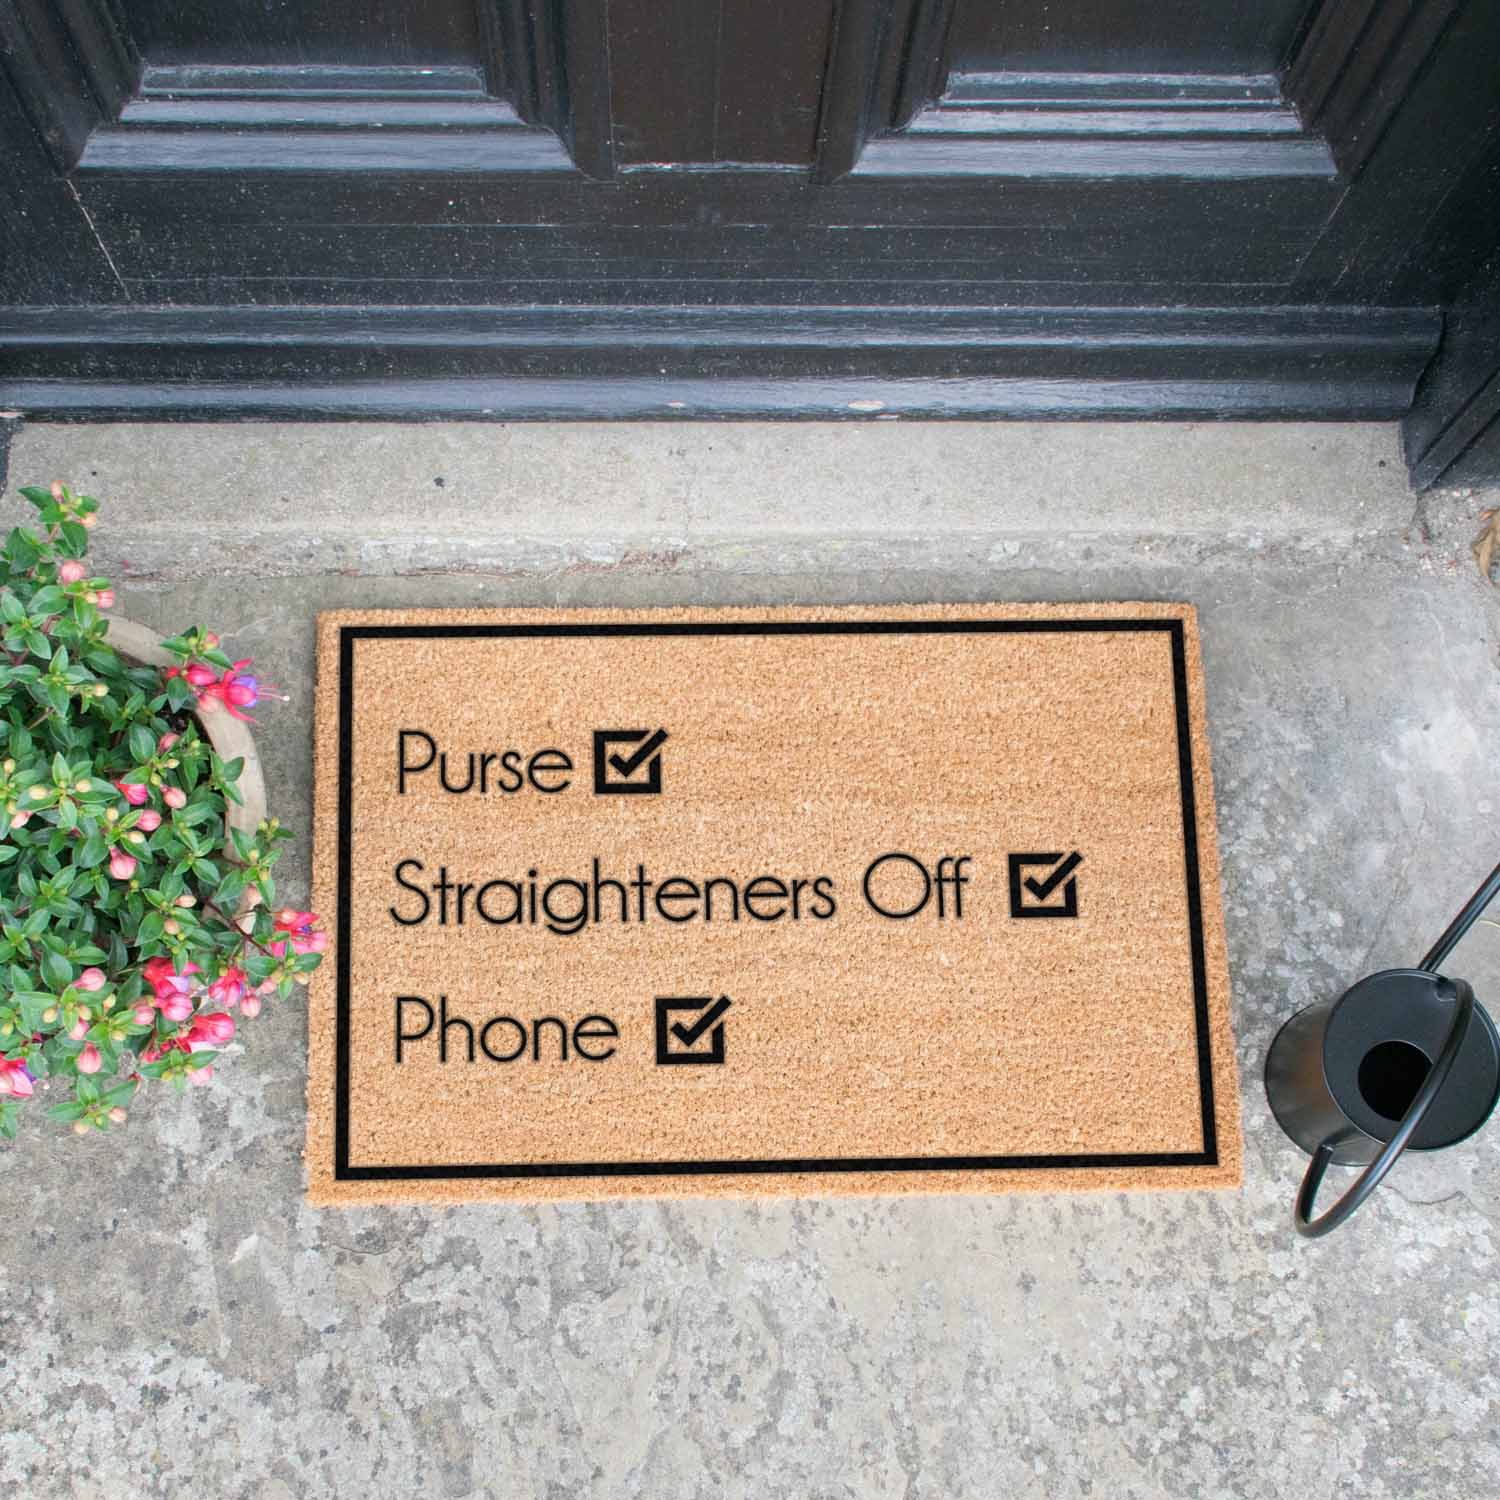 Purse, Straighteners , Phone Doormat - The Quirky Home Co